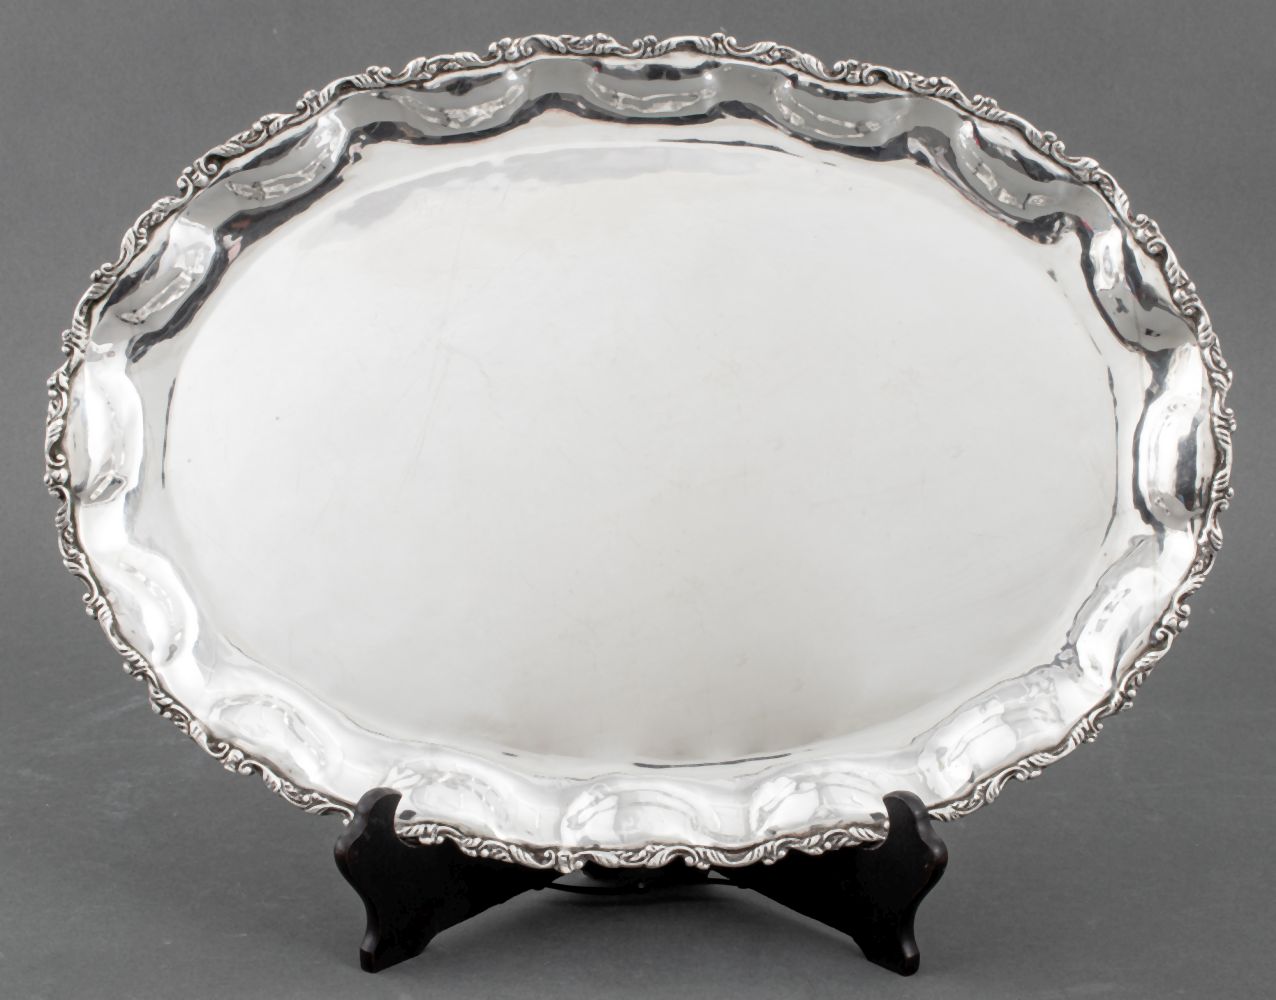 MEXICAN STERLING SILVER TRAY Mexican